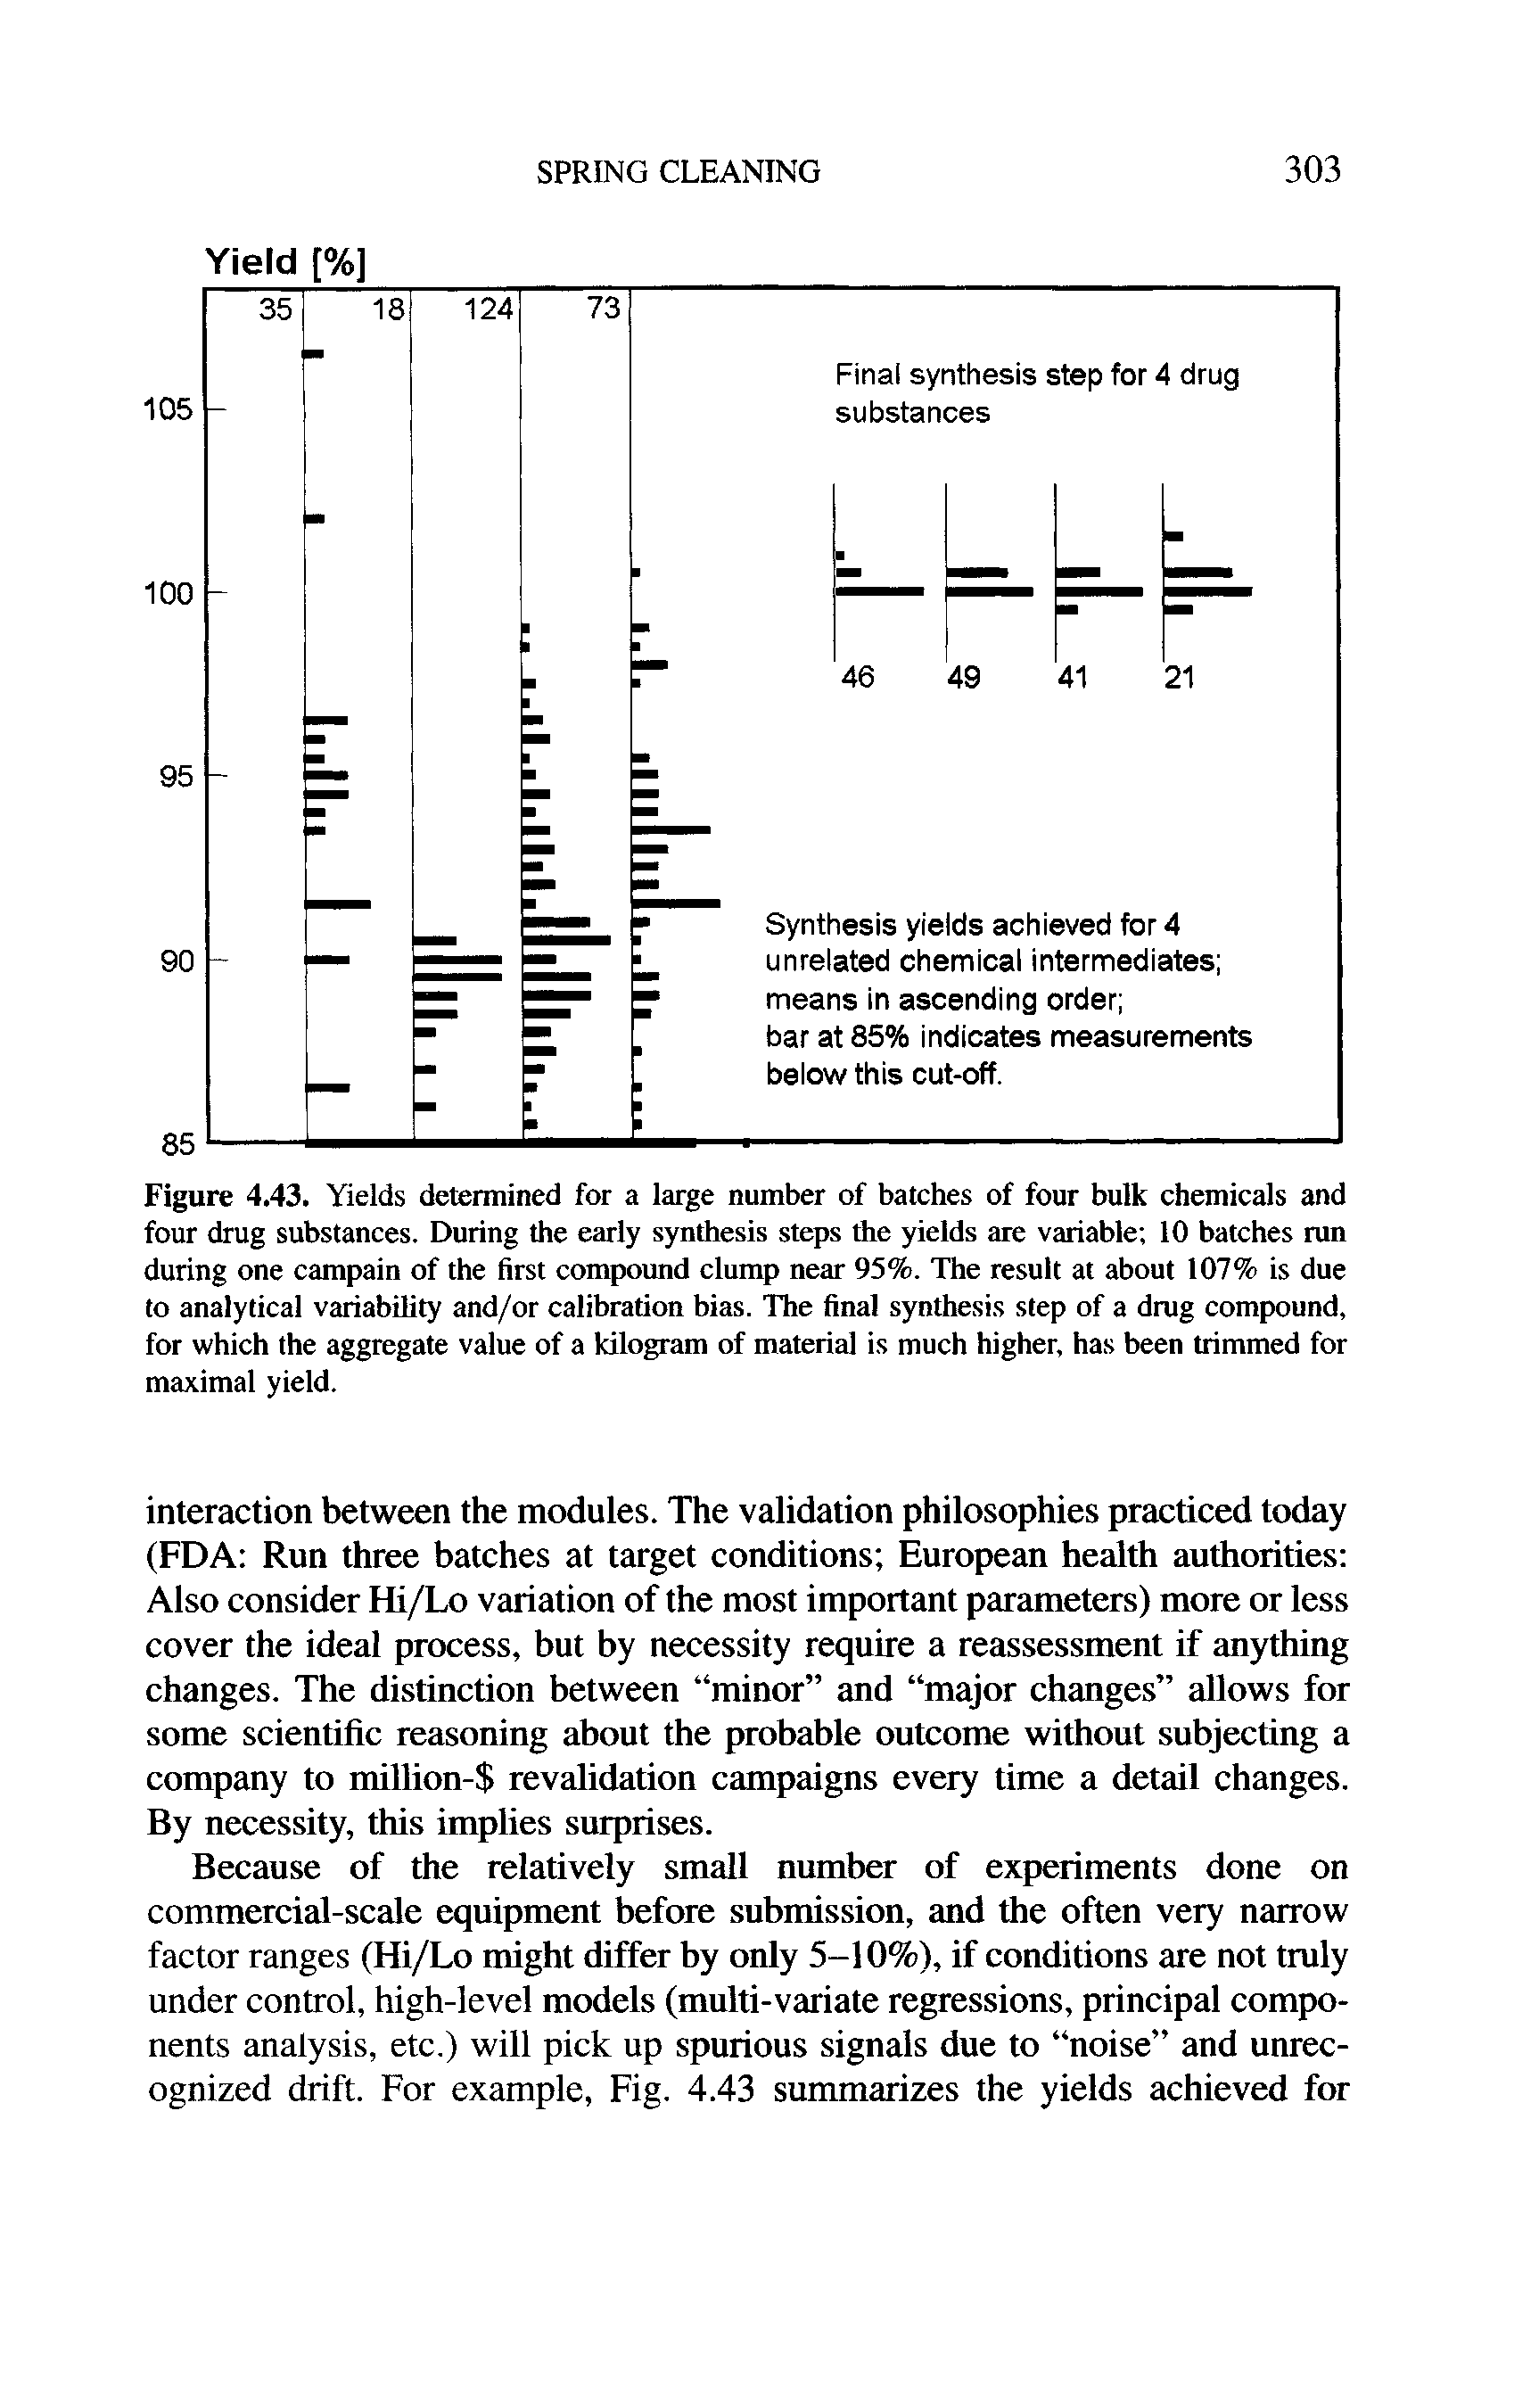 Figure 4.43. Yields determined for a large number of batches of four bulk chemicals and four drug substances. During the early synthesis steps the yields are variable 10 batches run during one campain of the first compound clump near 95%. The result at about 107% is due to analytical variability and/or calibration bias. The final synthesis step of a drug compound, for which the aggregate value of a kilogram of material is much higher, has been trimmed for maximal yield.